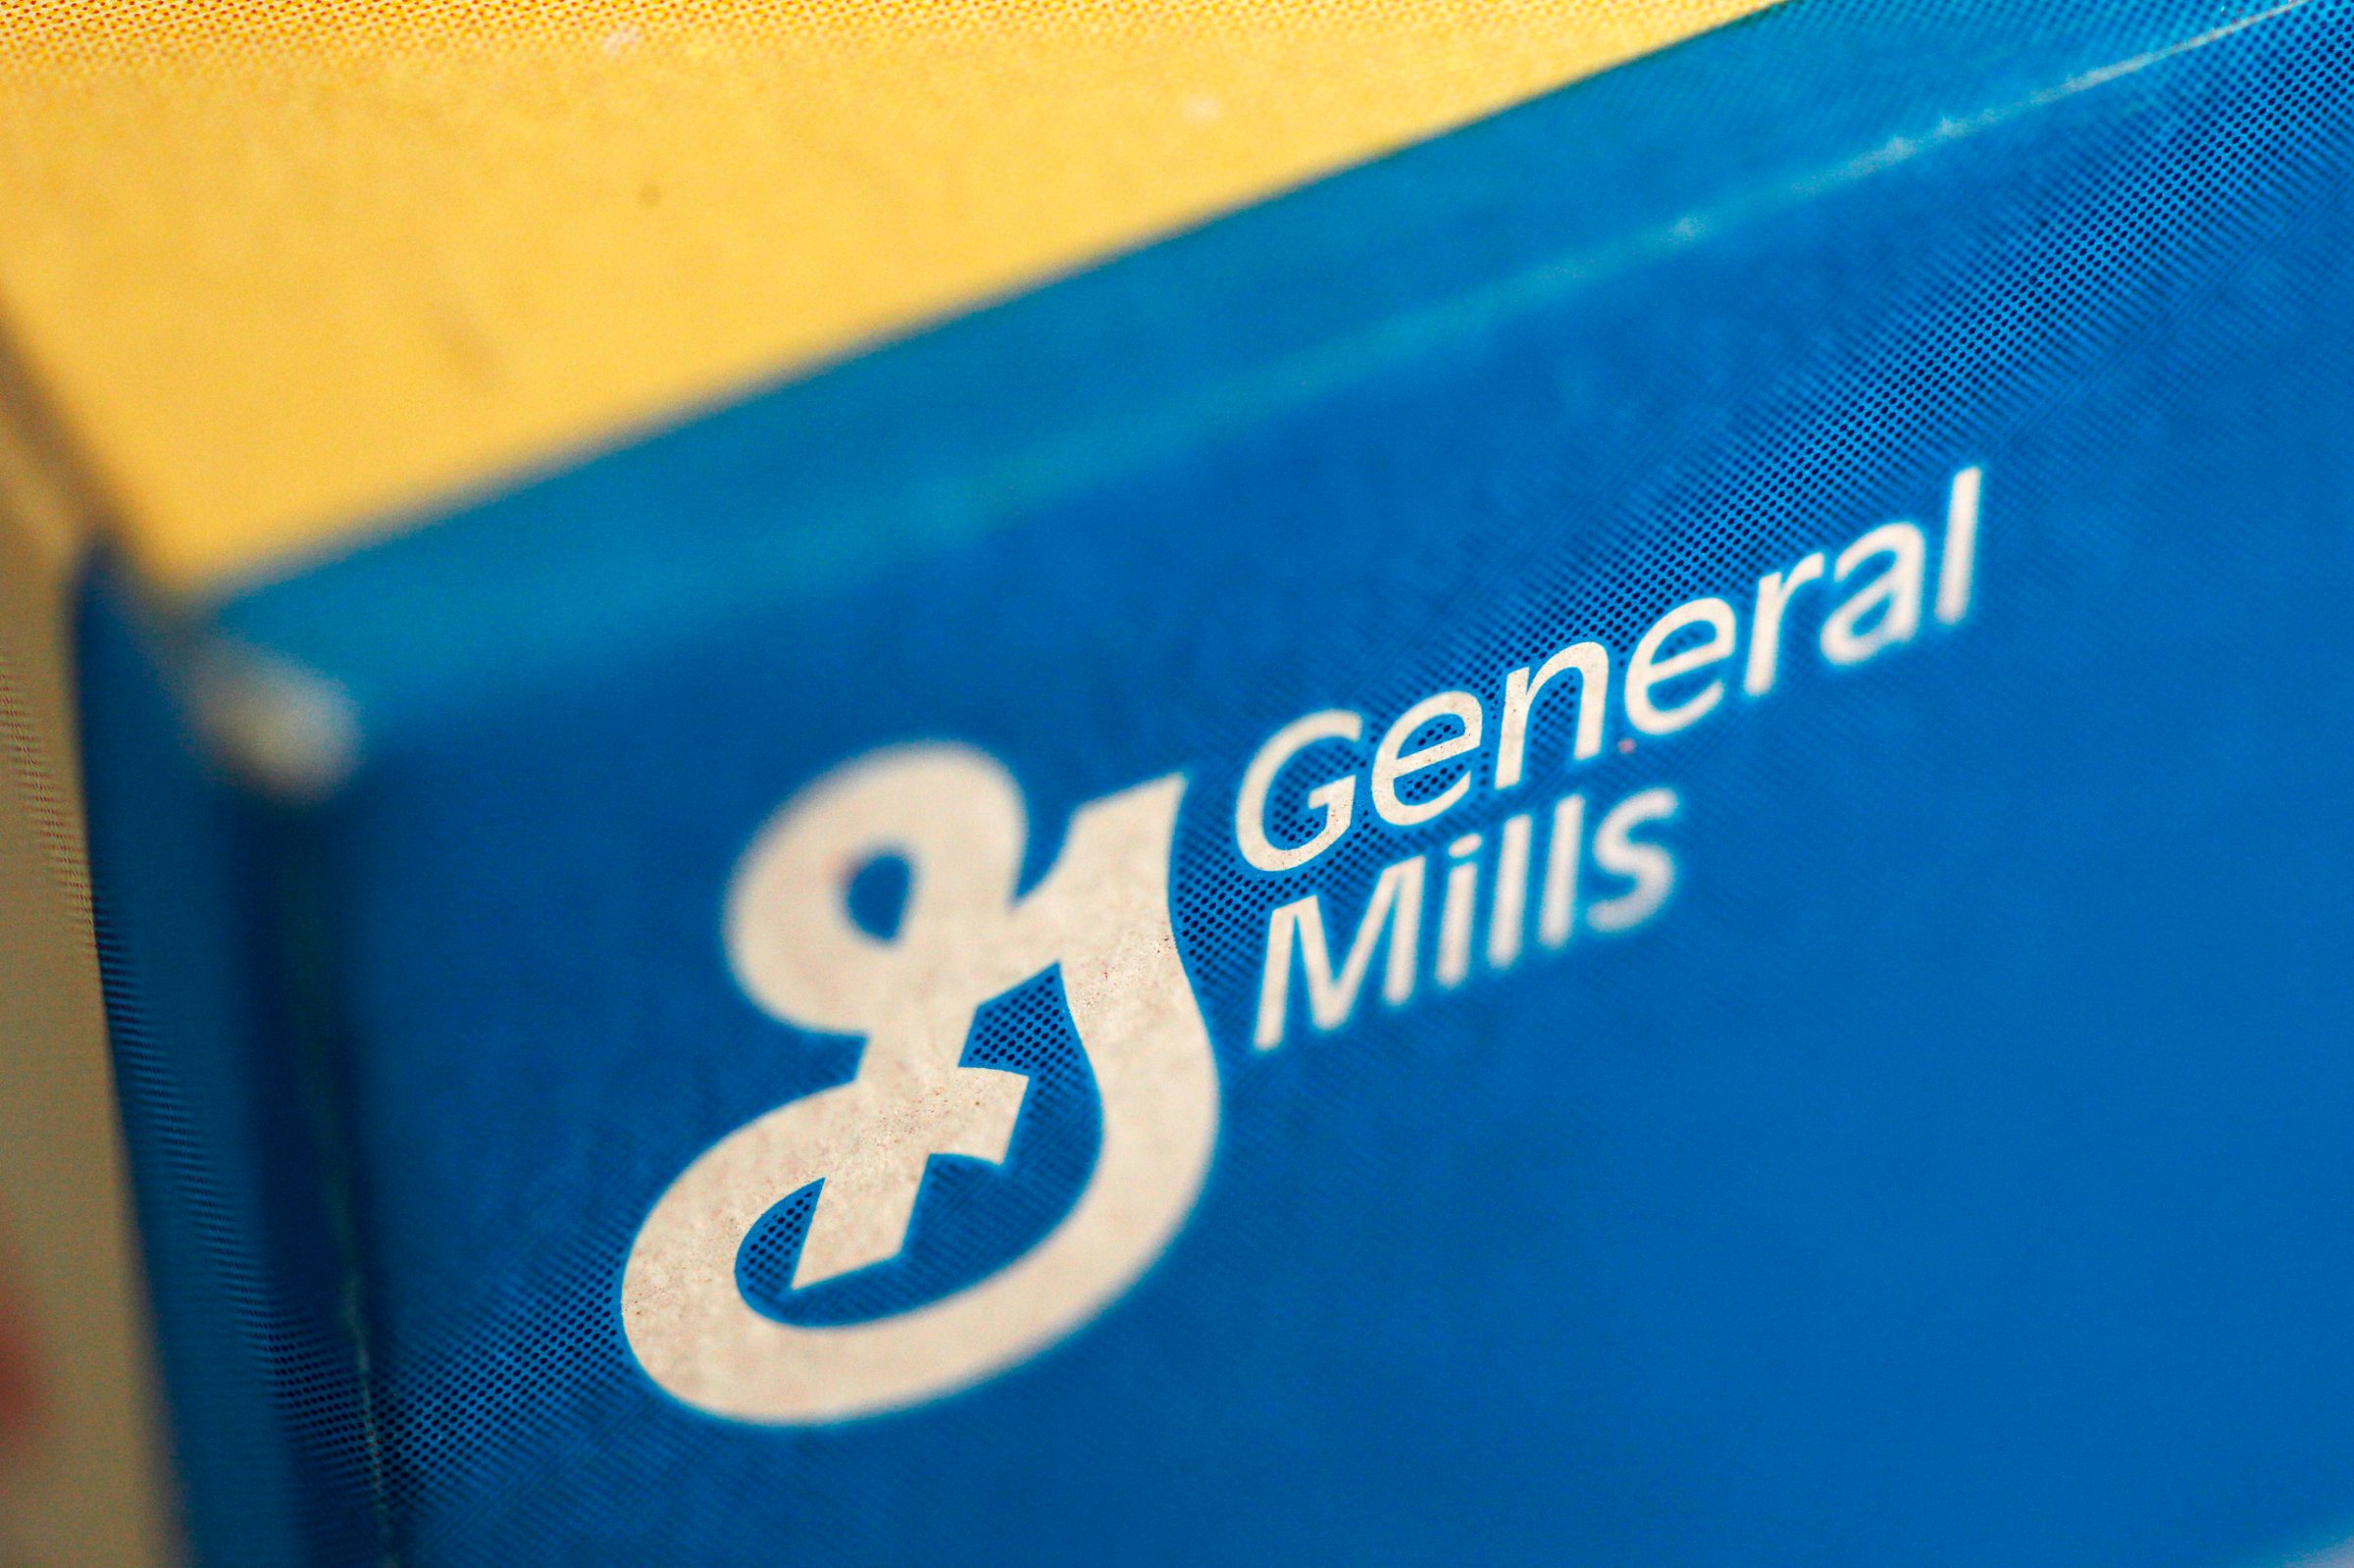 General Mills logo on a cereal box.